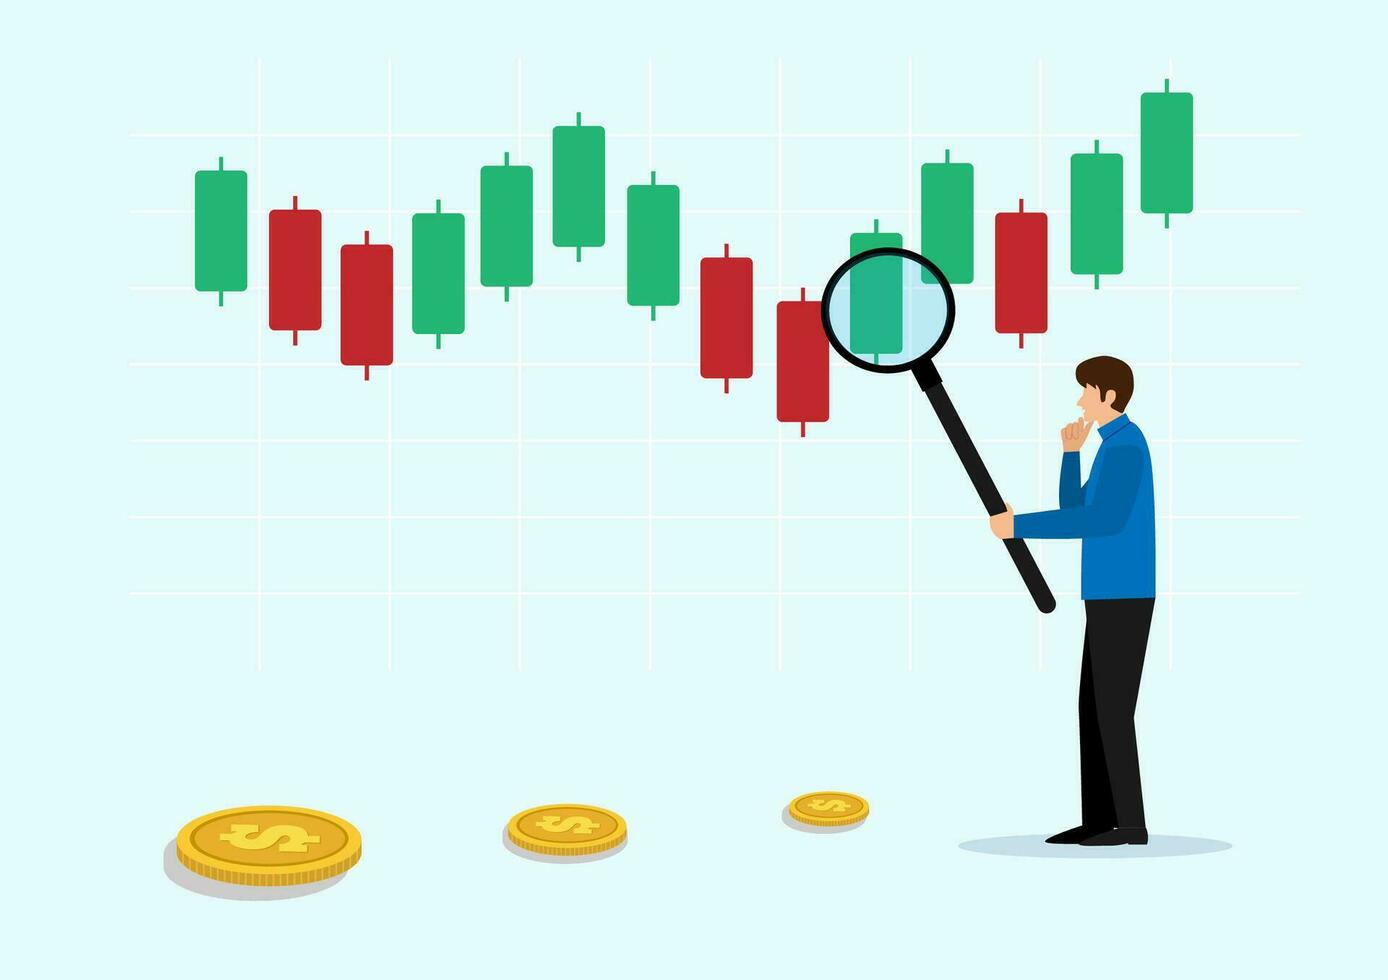 Technical analysis trader to analyze stock market or crypto currency data movement, trend analysis to take profit, buy and sell indicator chart concept, businessman trader magnify candlestick chart. vector